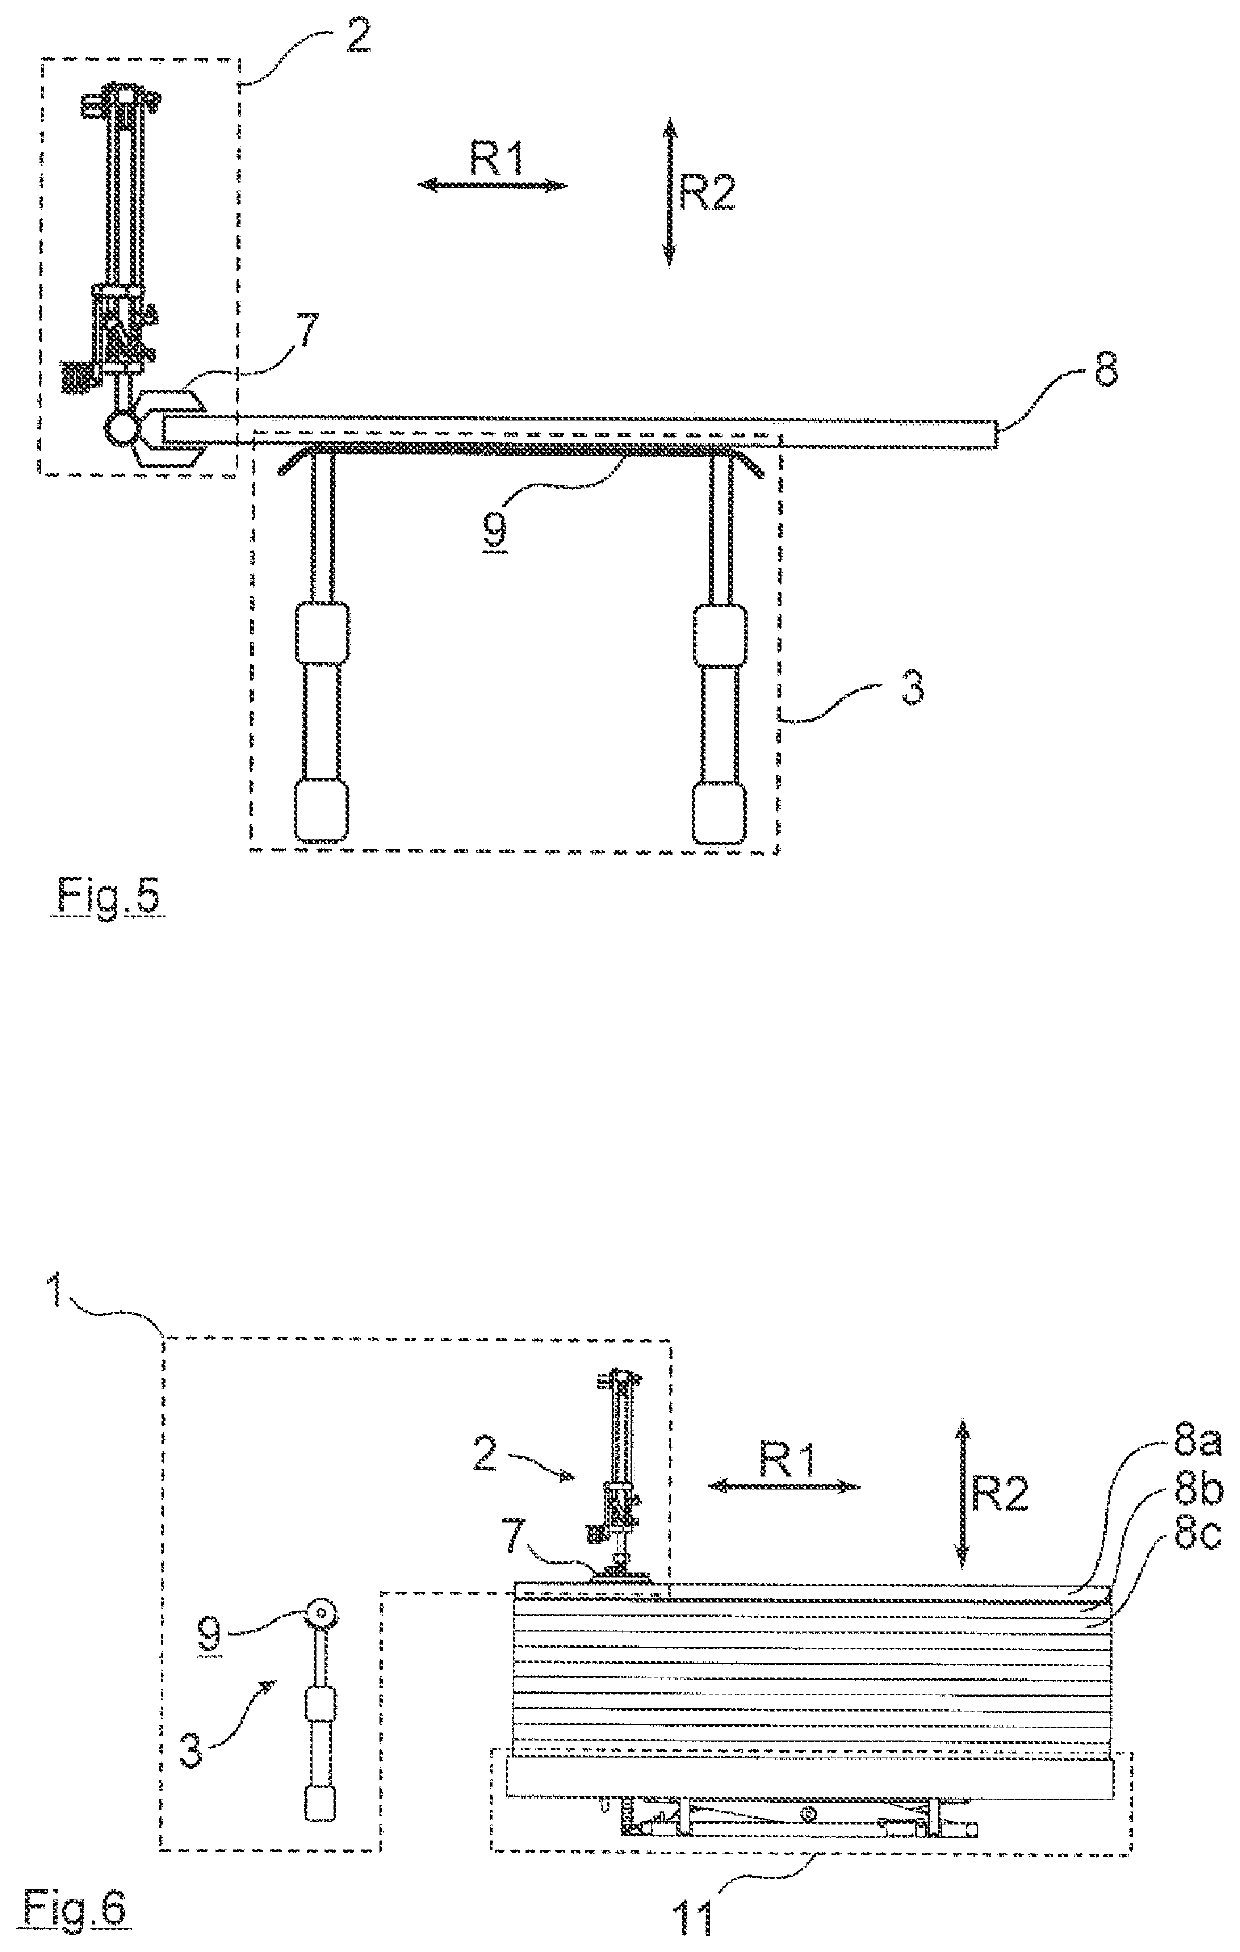 Workpiece handling apparatus and method for batch processing panel-type workpieces